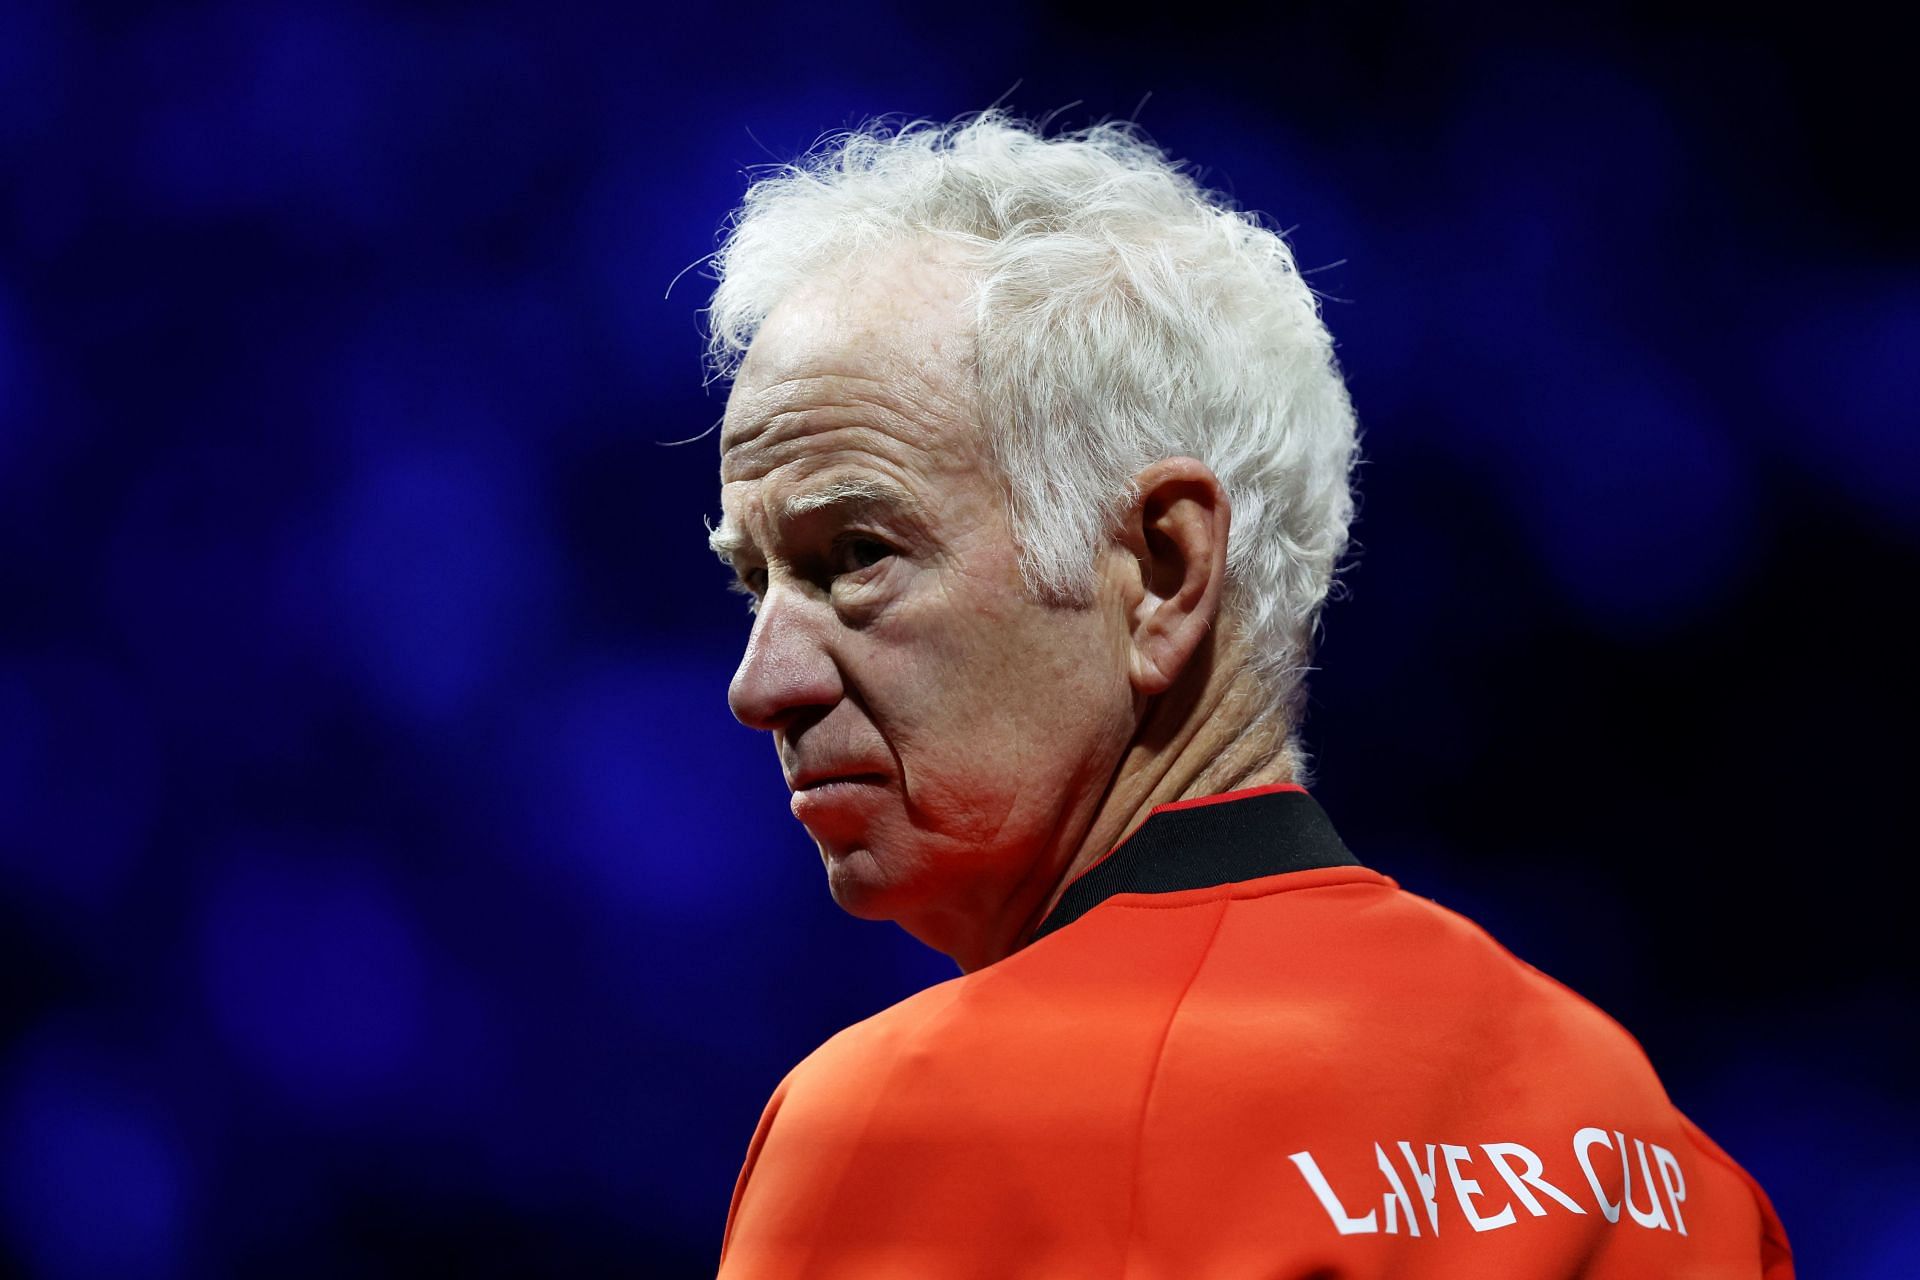 John McEnroe at the Laver Cup 2022 - Day Three.